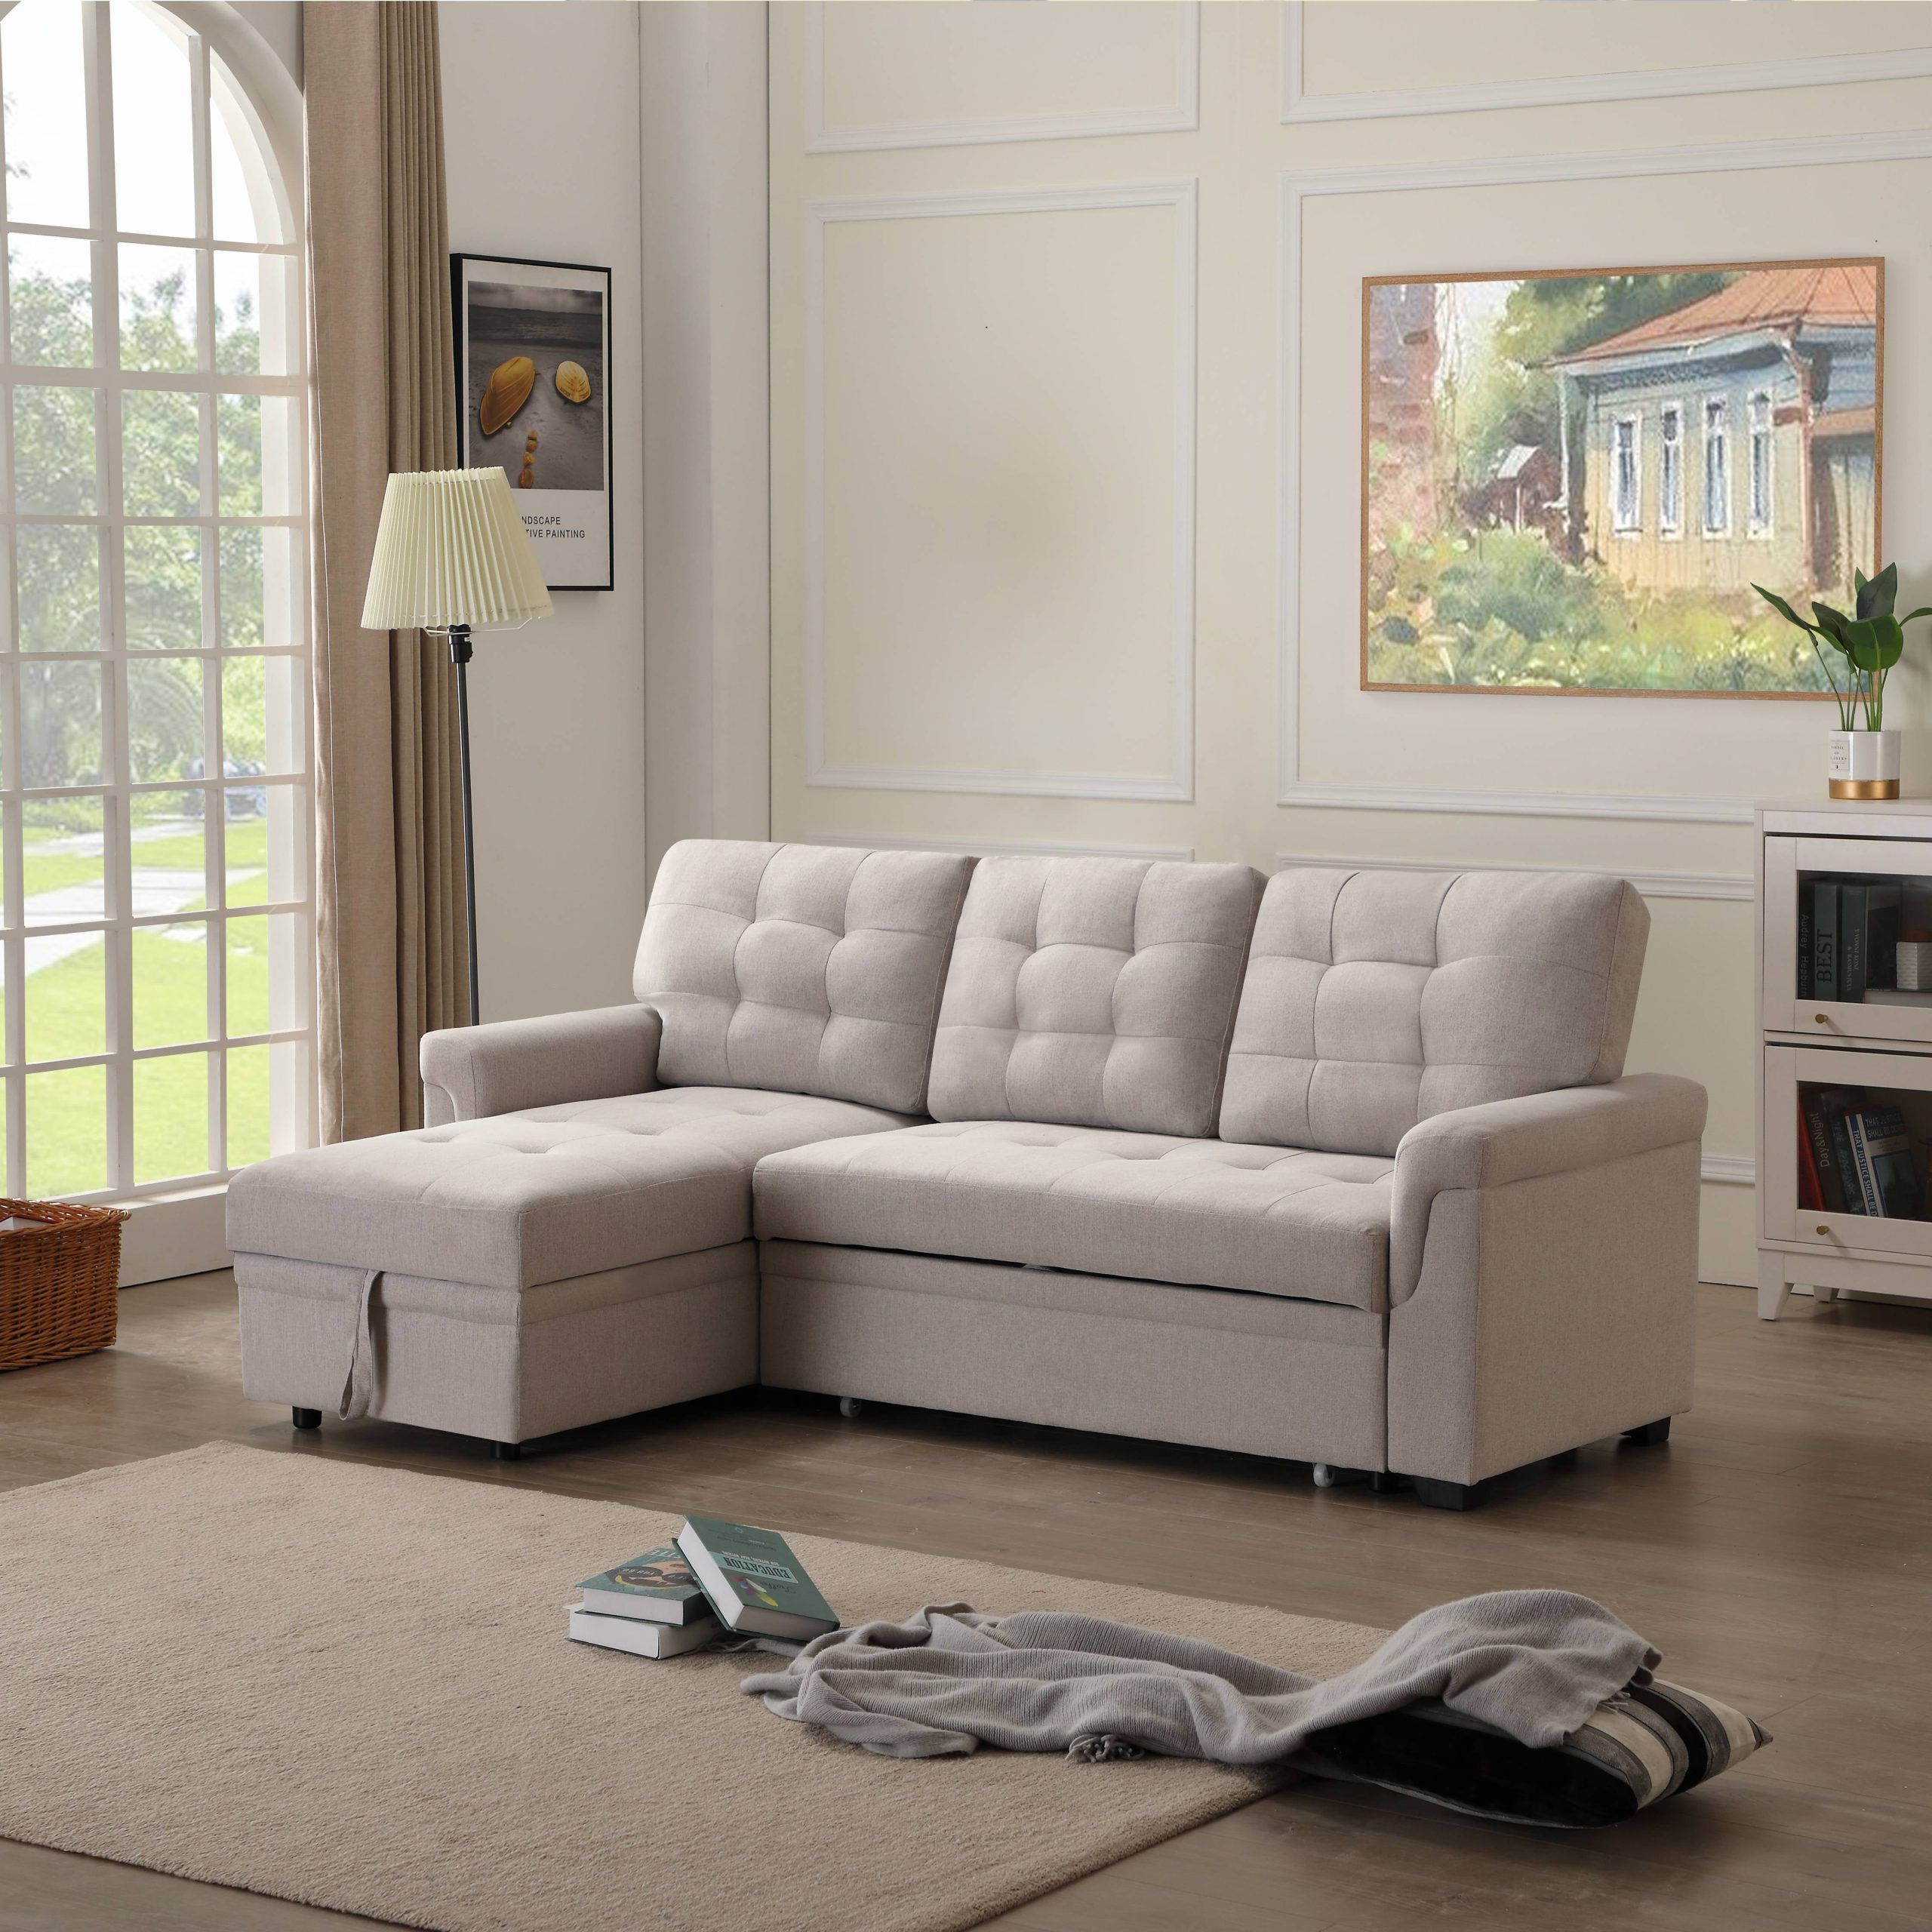 L Shaped Sectional Sofa Bed With Reversible Chaise, 86"w Modern 3 Seat With Regard To Small L Shaped Sectional Sofas In Beige (Gallery 1 of 21)